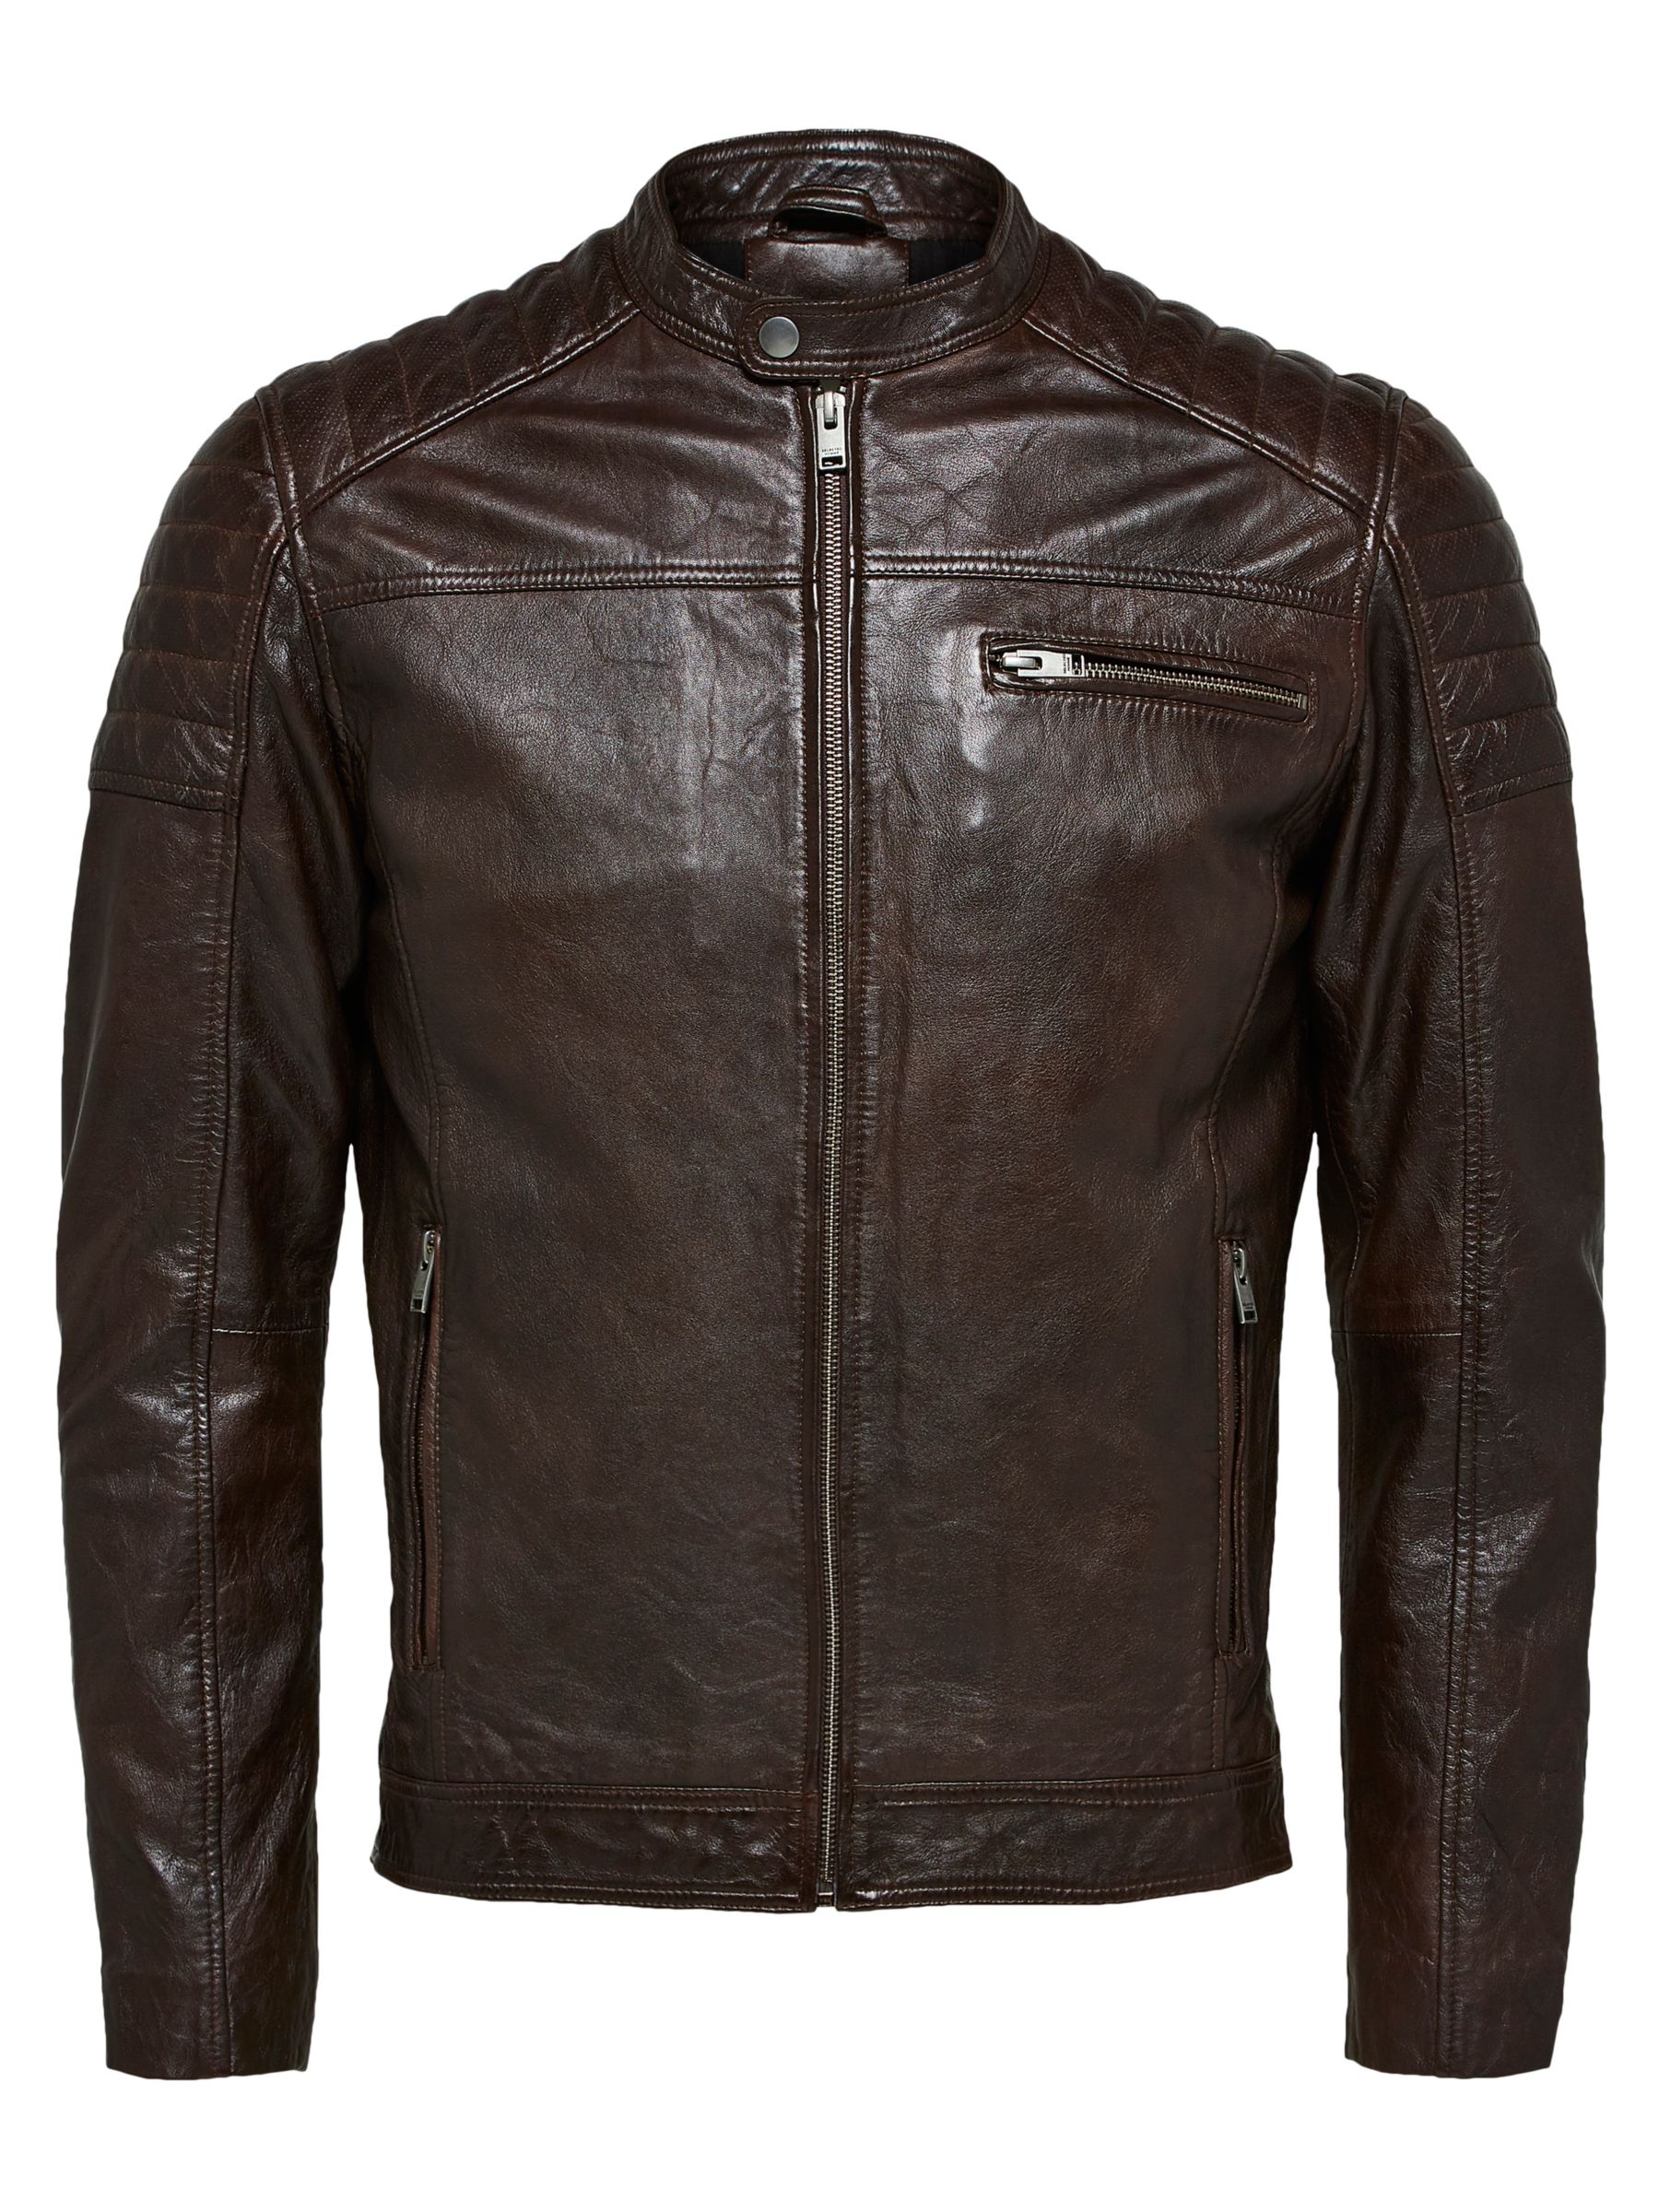 Selected Homme Leather Jacket, Brown at John Lewis & Partners